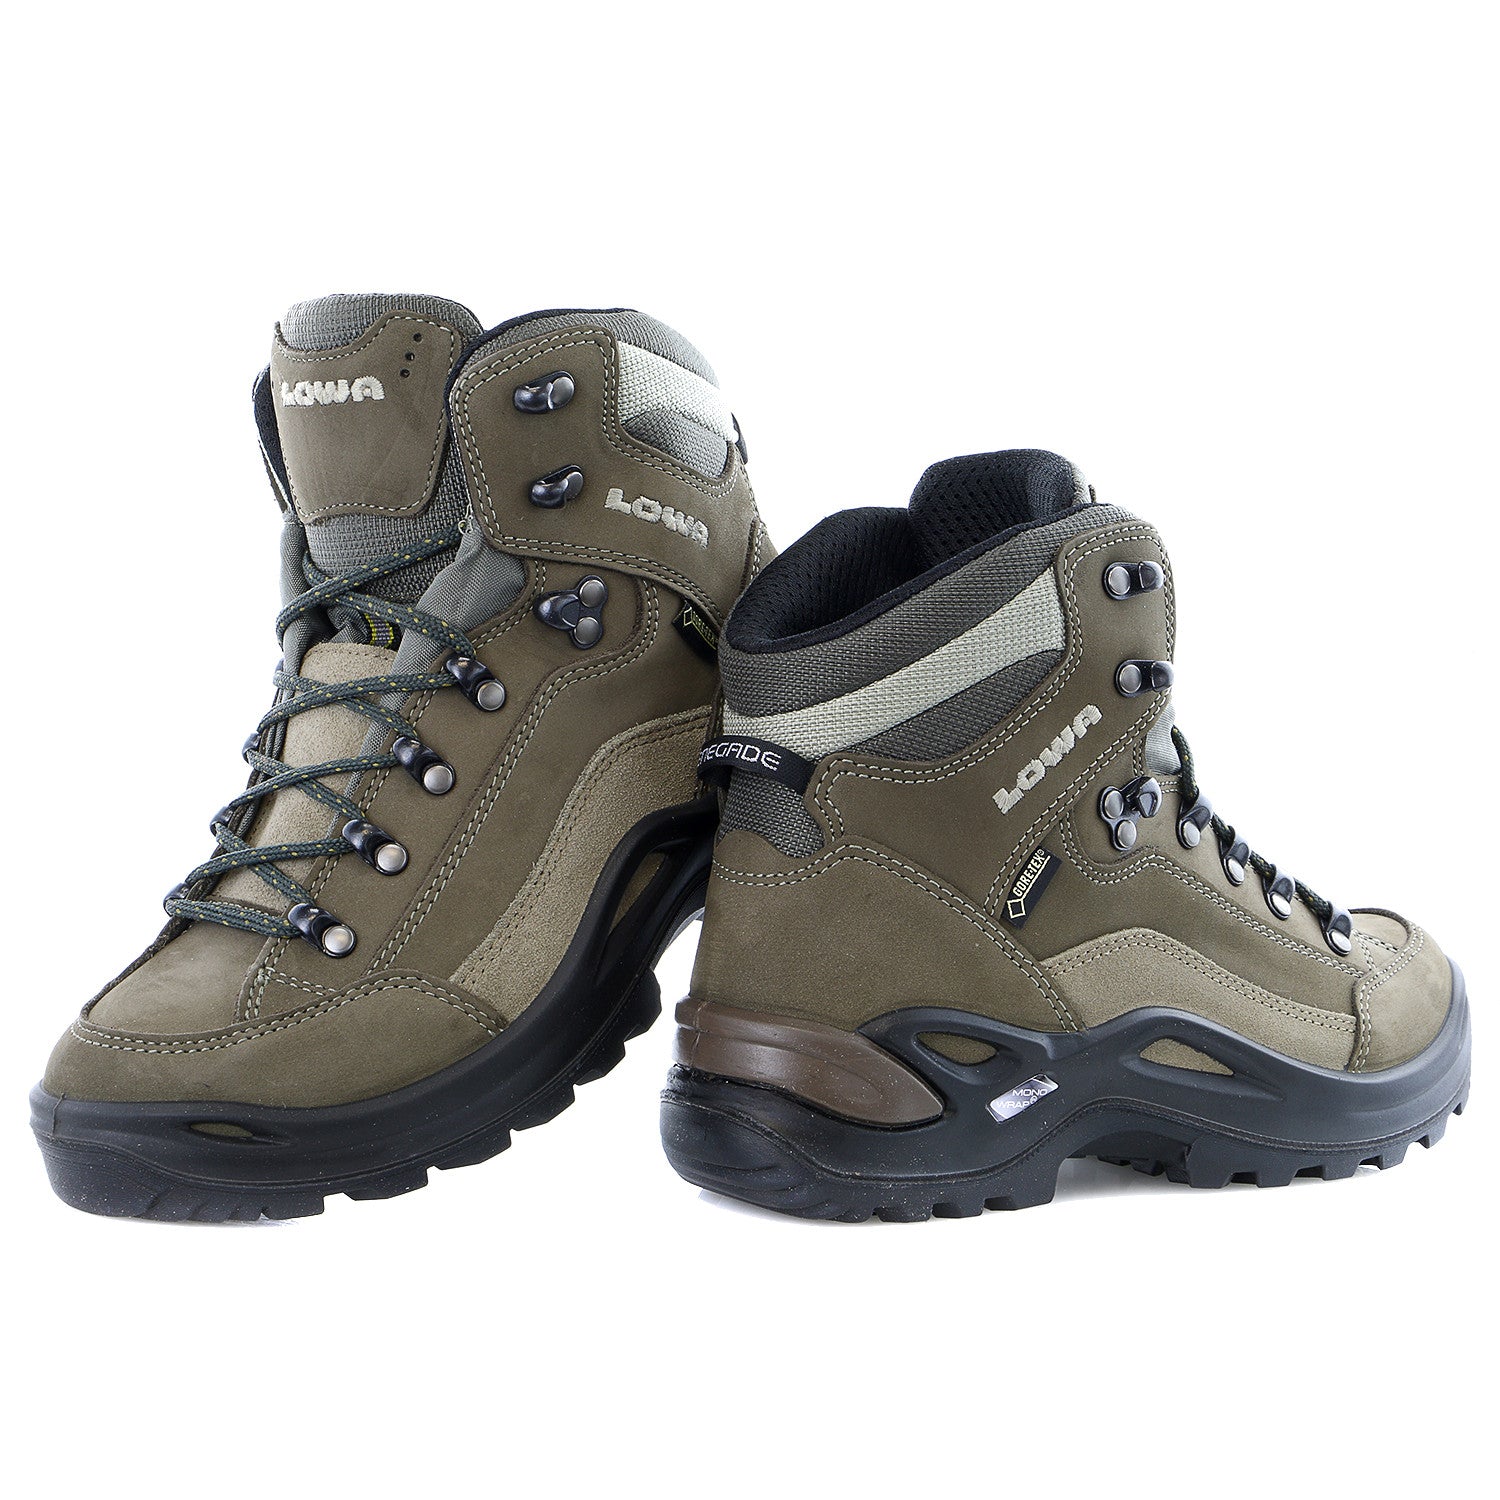 gore tex mid hiking boots